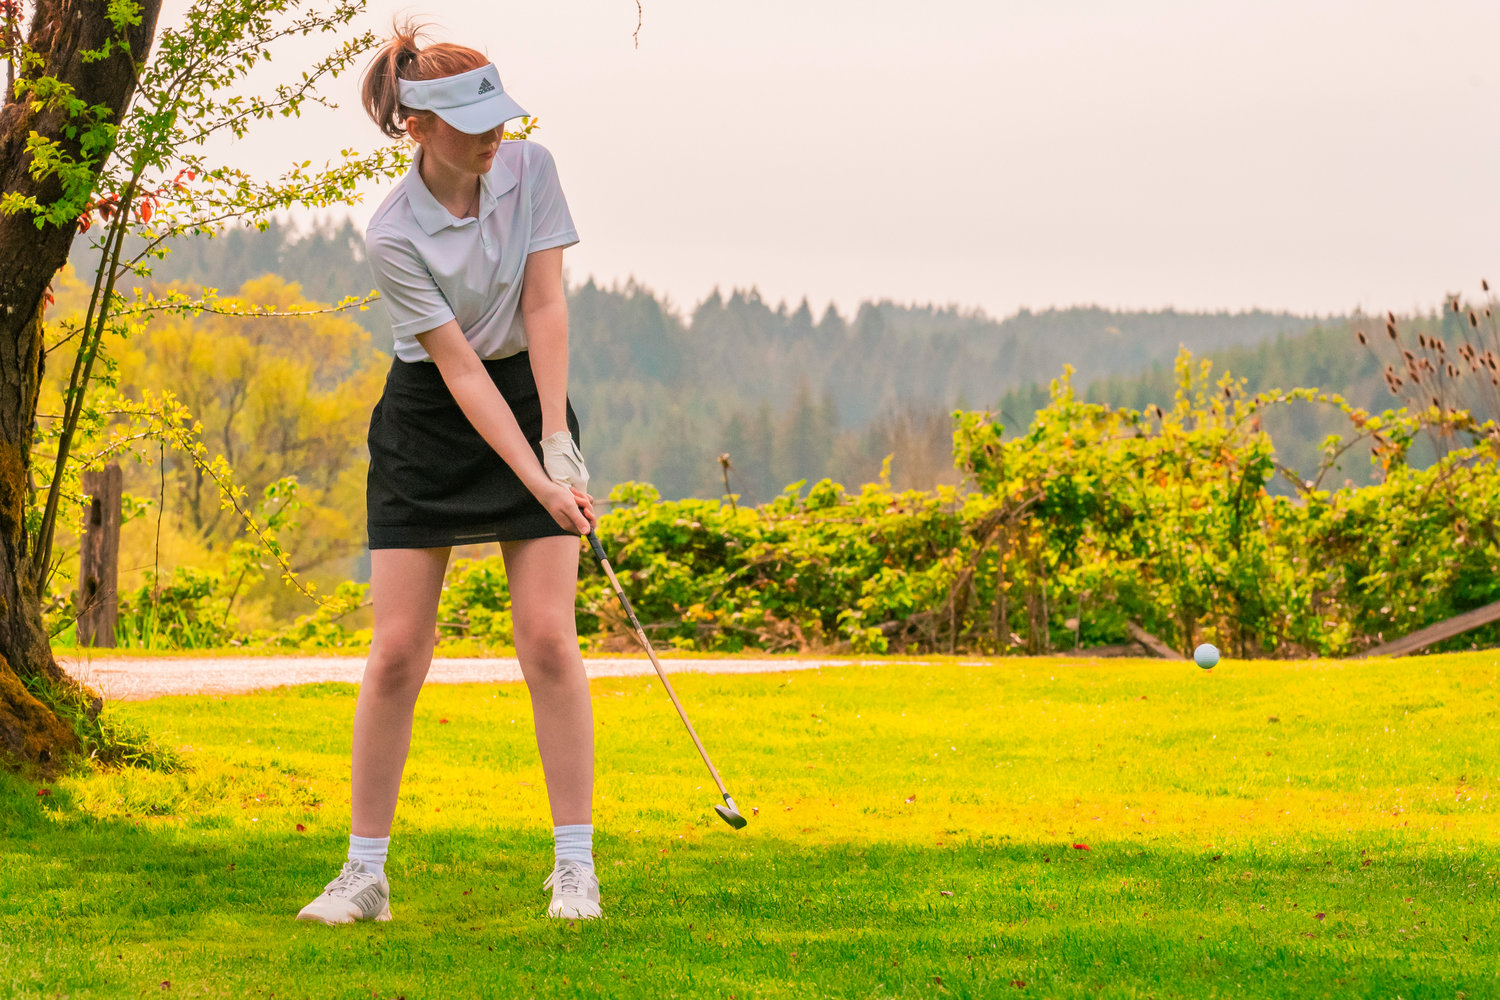 Centralia’s Samantha Johnston makes contact with her golf ball at Riverside Golf course in Chehalis on Monday.